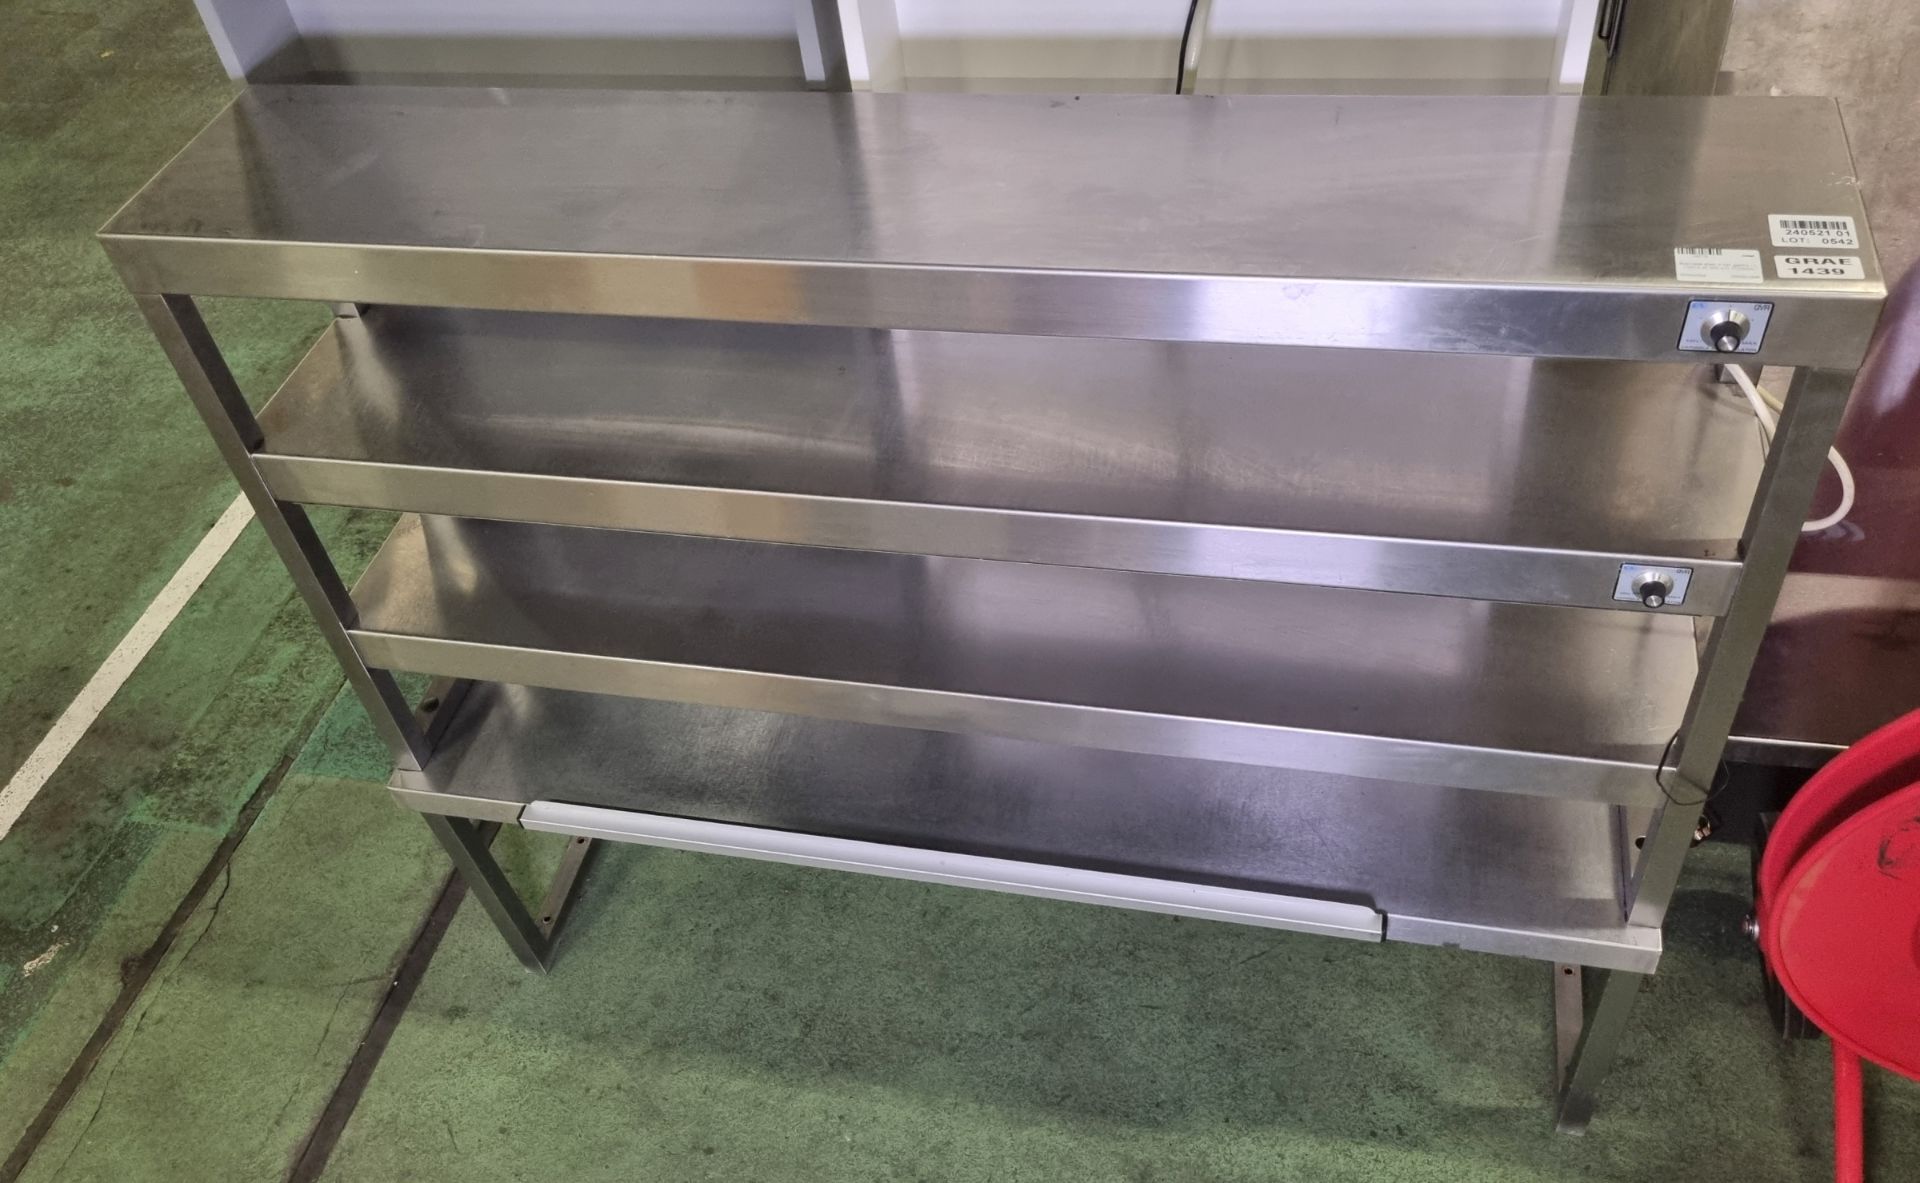 Stainless steel 4 tier gantry - L 1350 x W 300 x H 1120mm - Image 2 of 4